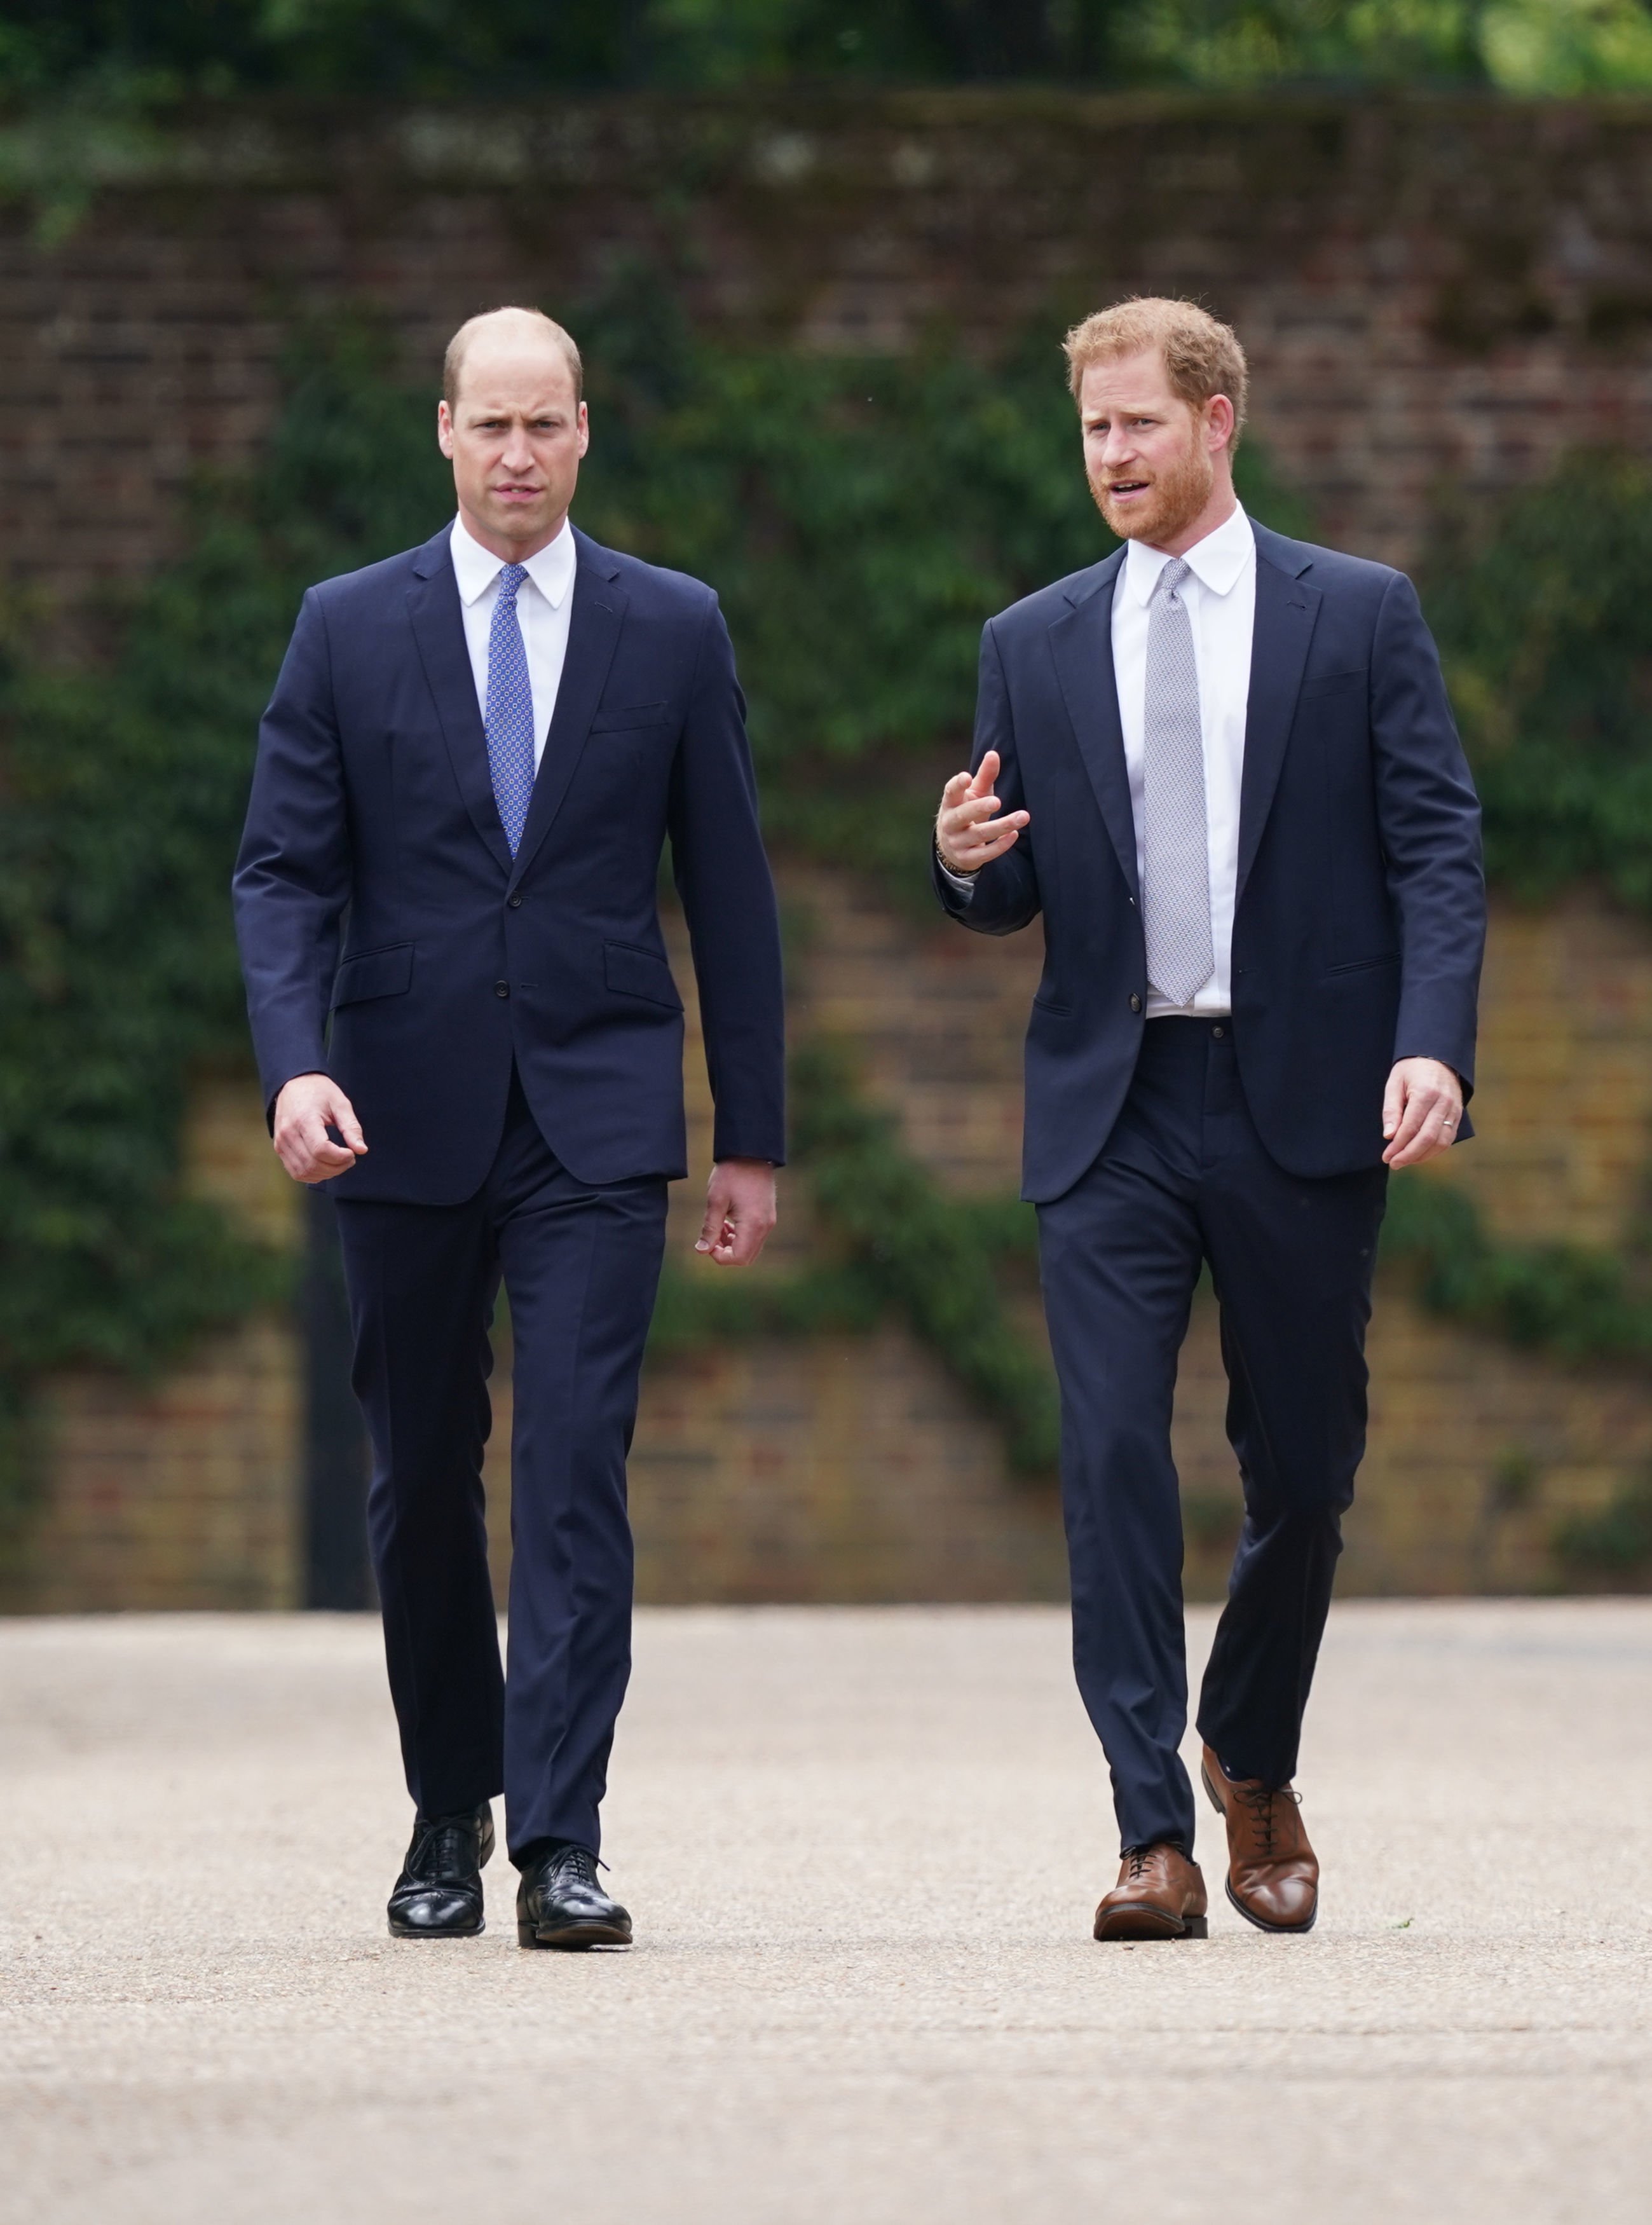 Prince William and Prince Harry arriving for the unveiling of a statue of their mother Diana, Princess of Wales, in the Sunken Garden at Kensington Palace on July 1, 2021 in London, England. / Source: Getty Images